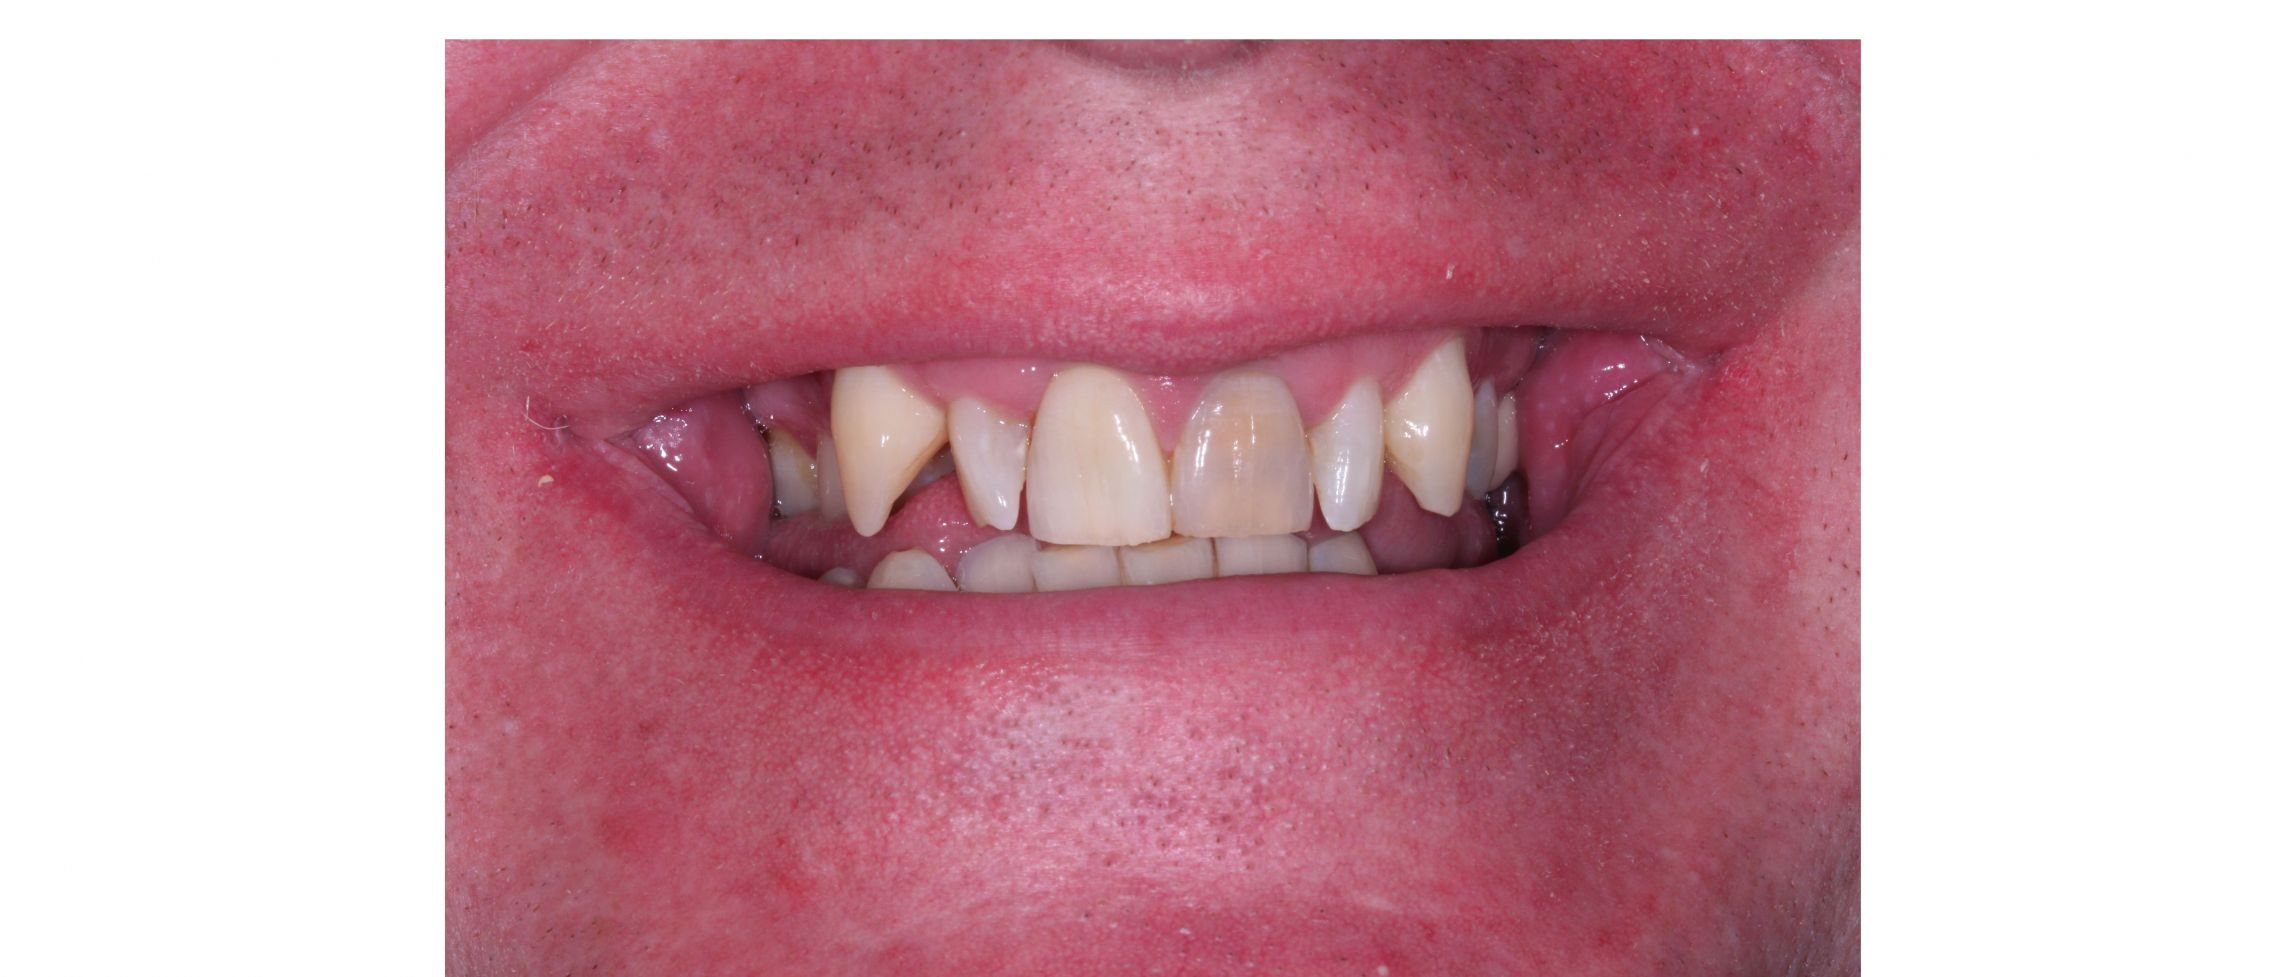 case4 - before treatment